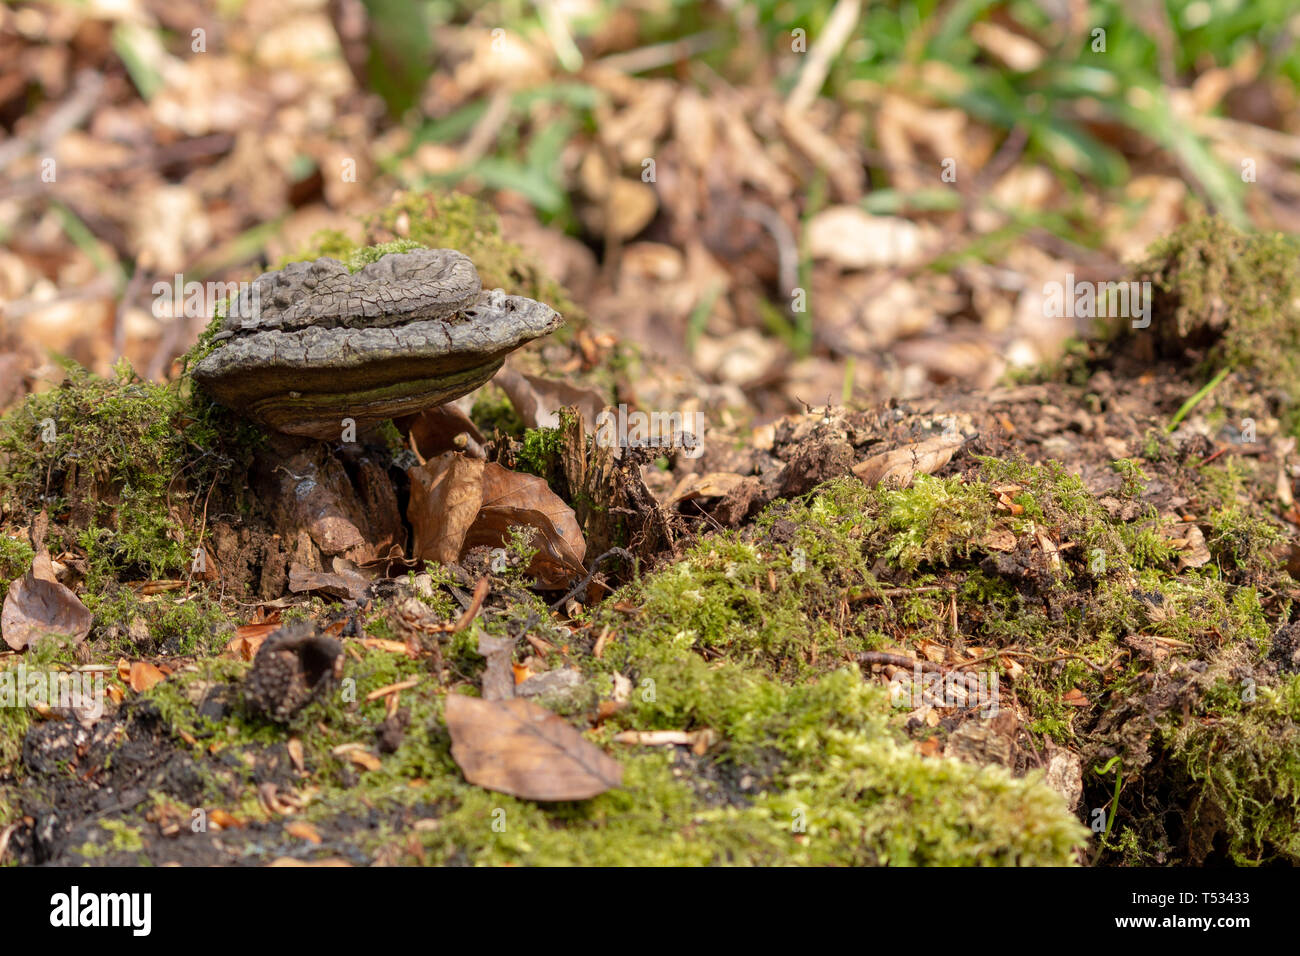 Hoof fungus (fomes formentarius) growing on a dead birch tree stump in a forest. Stock Photo